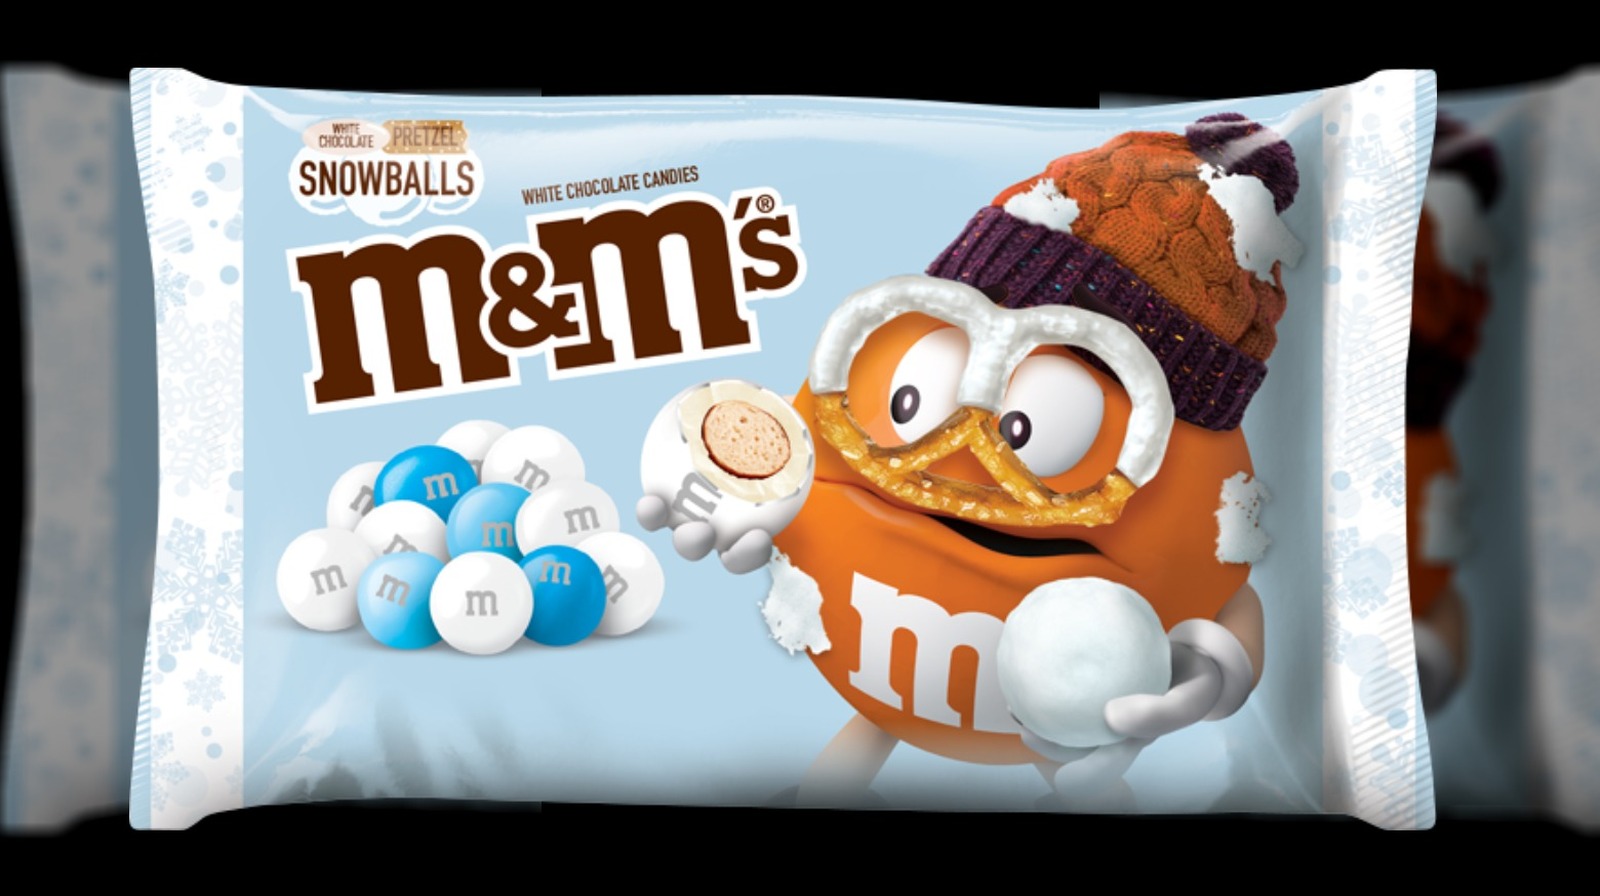 REVIEW: Shimmery White Chocolate M&M's - The Impulsive Buy